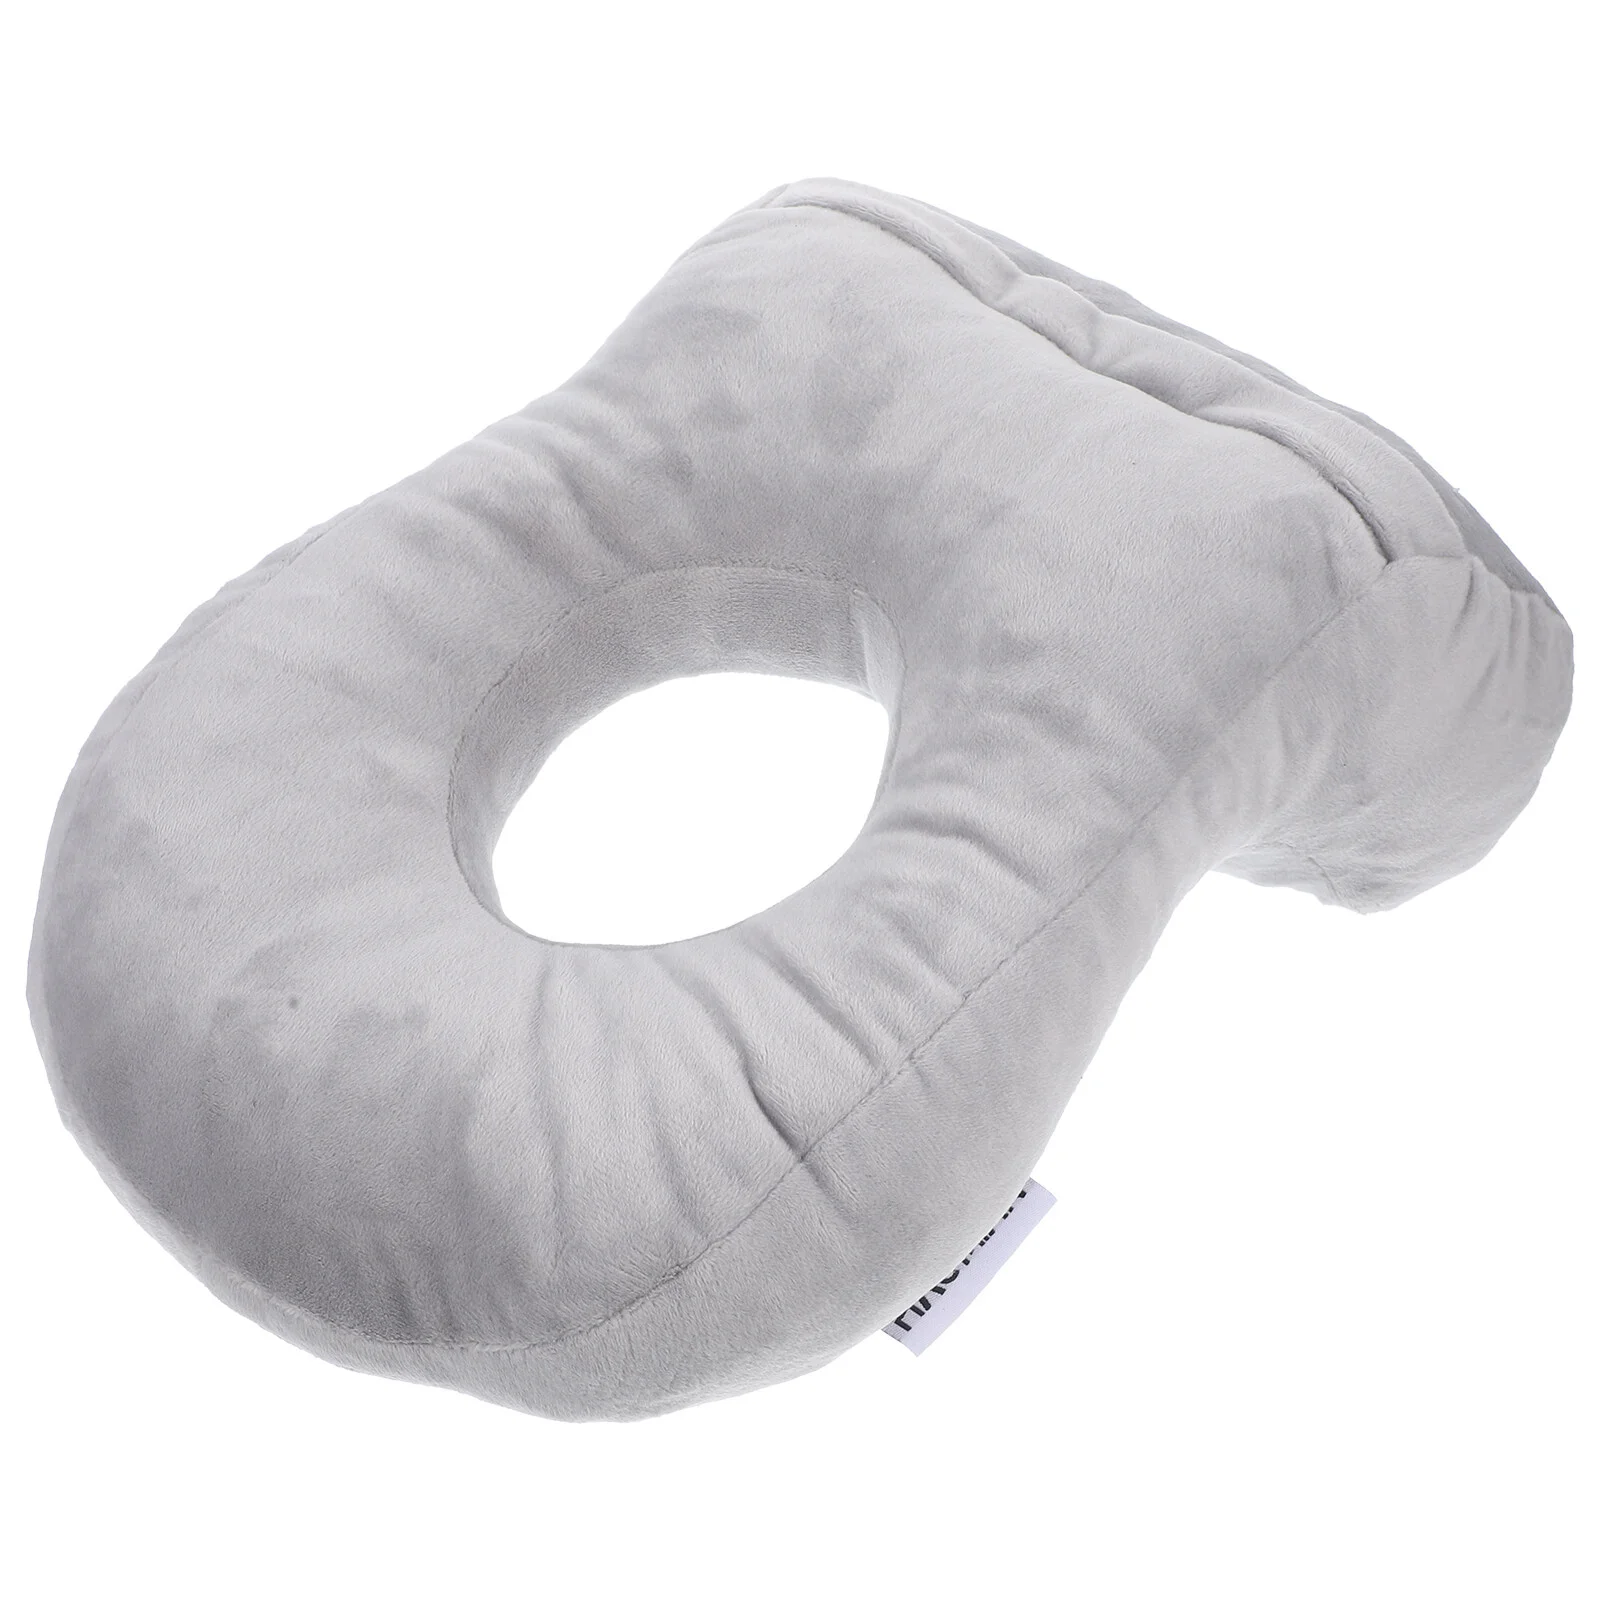 

Single Hole Squishy Pillows For Adults Relax Office Side Household Convenient Nap Home Sleep Accessory Desktop